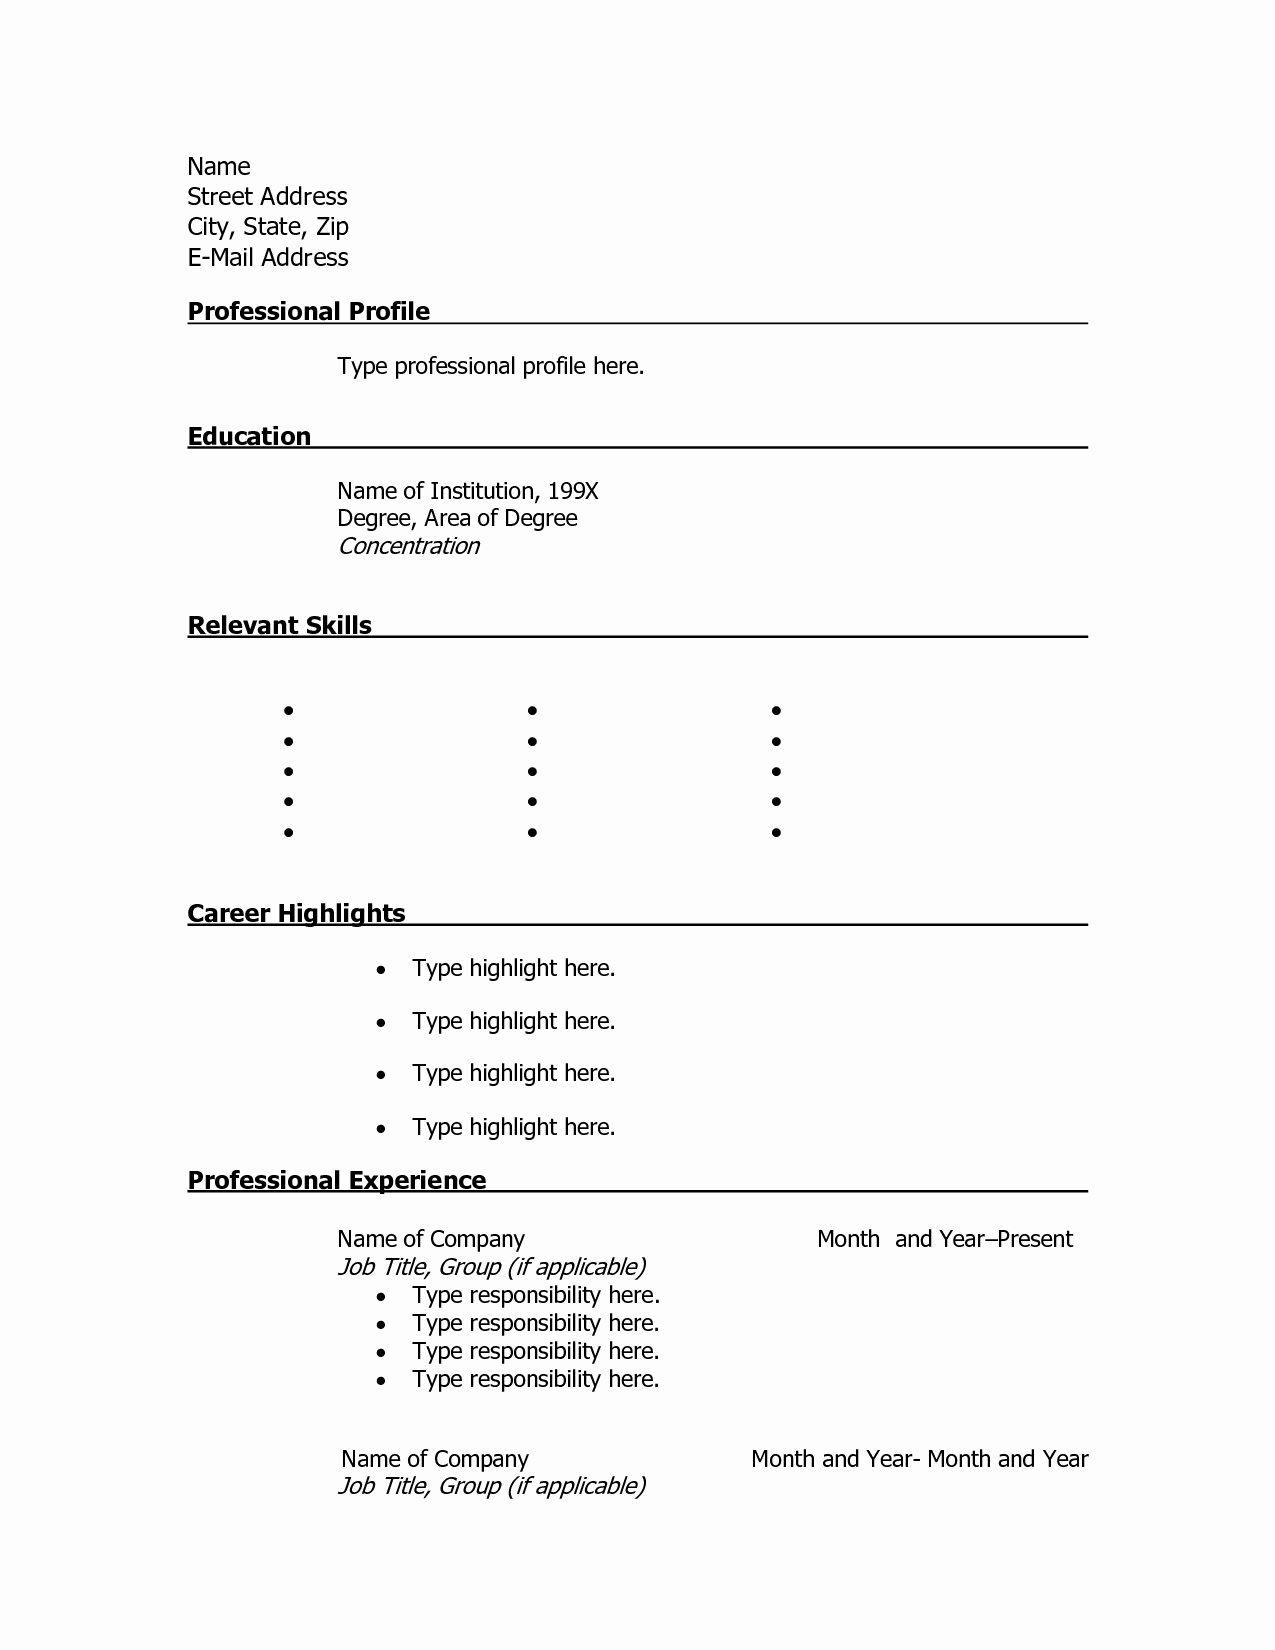 resume template online free download